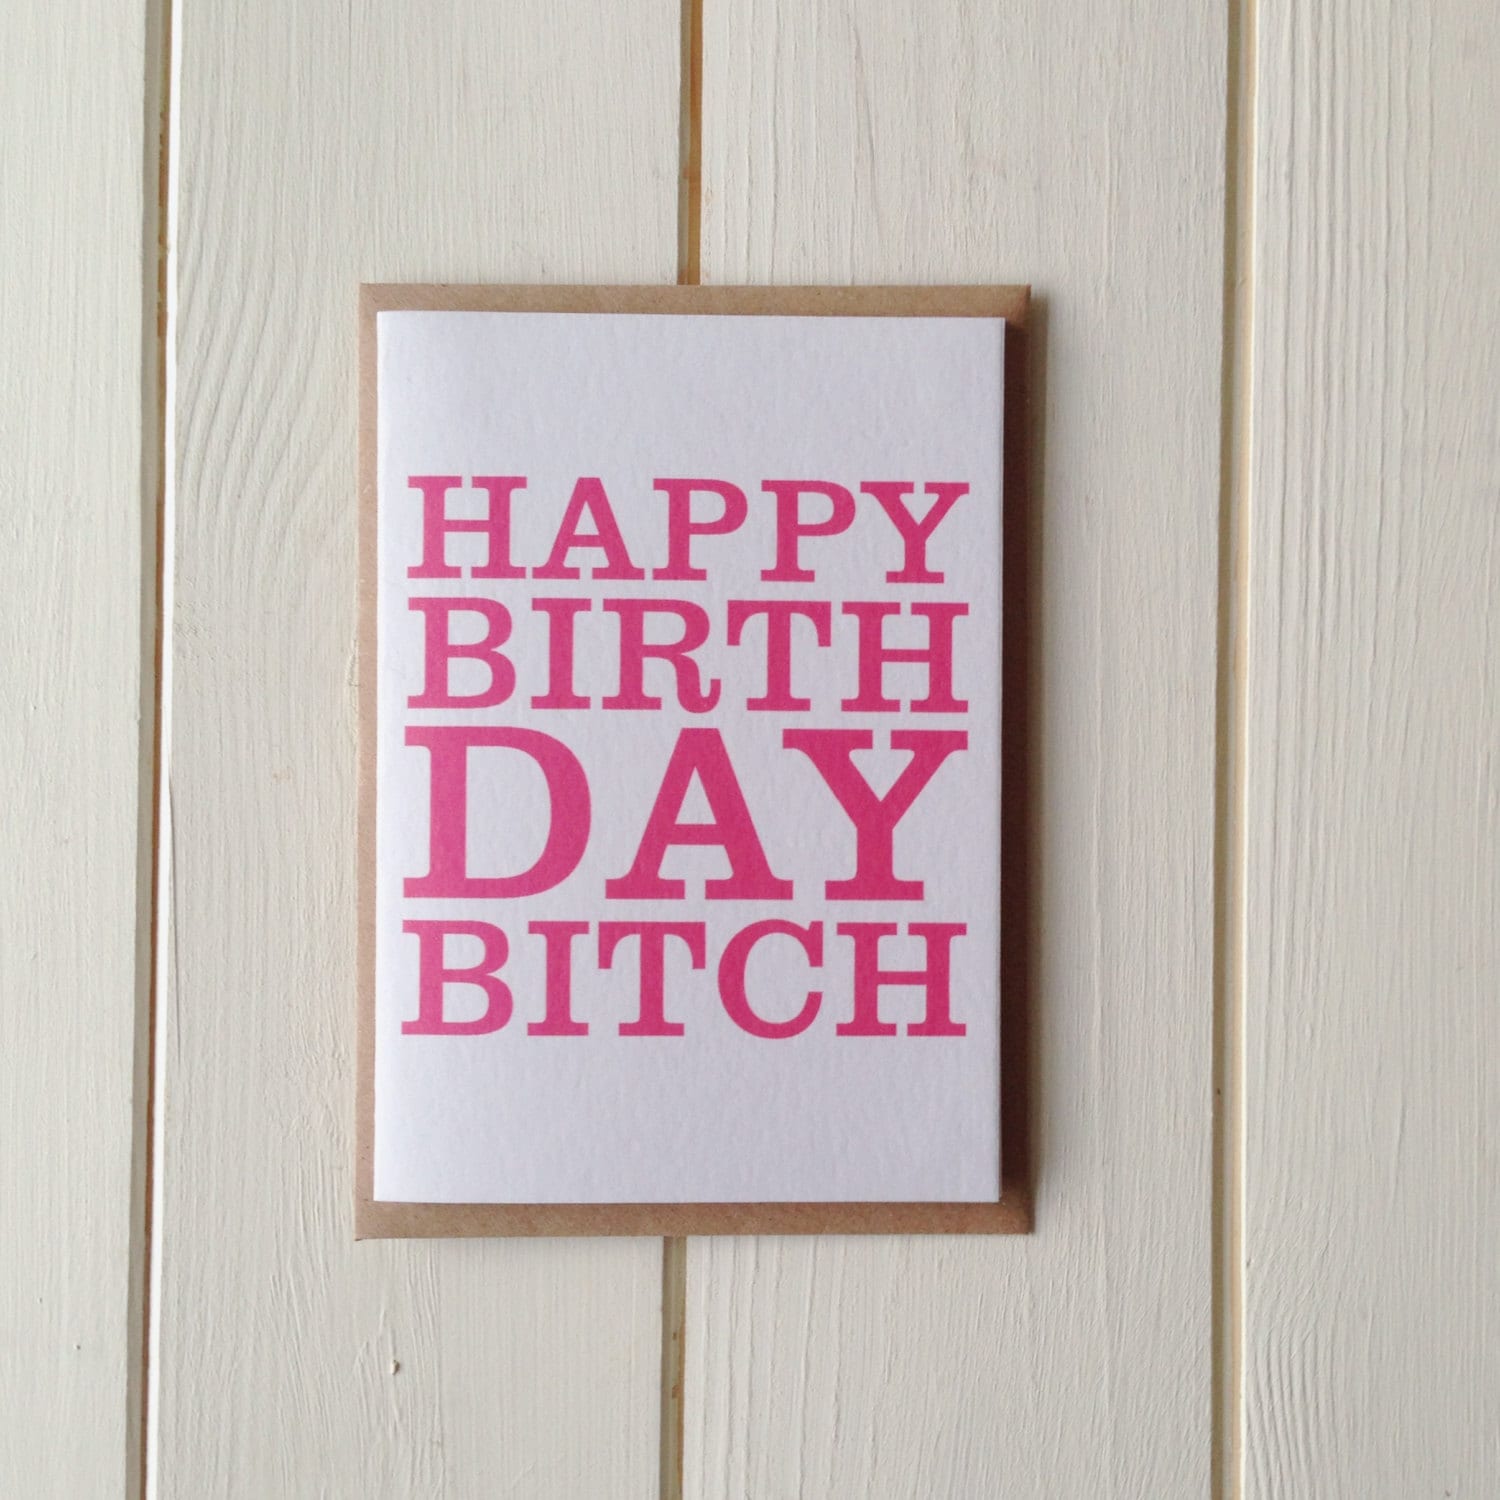 Happy Birthday Bitch Greetings Card By Doyoupunctuate On Etsy.